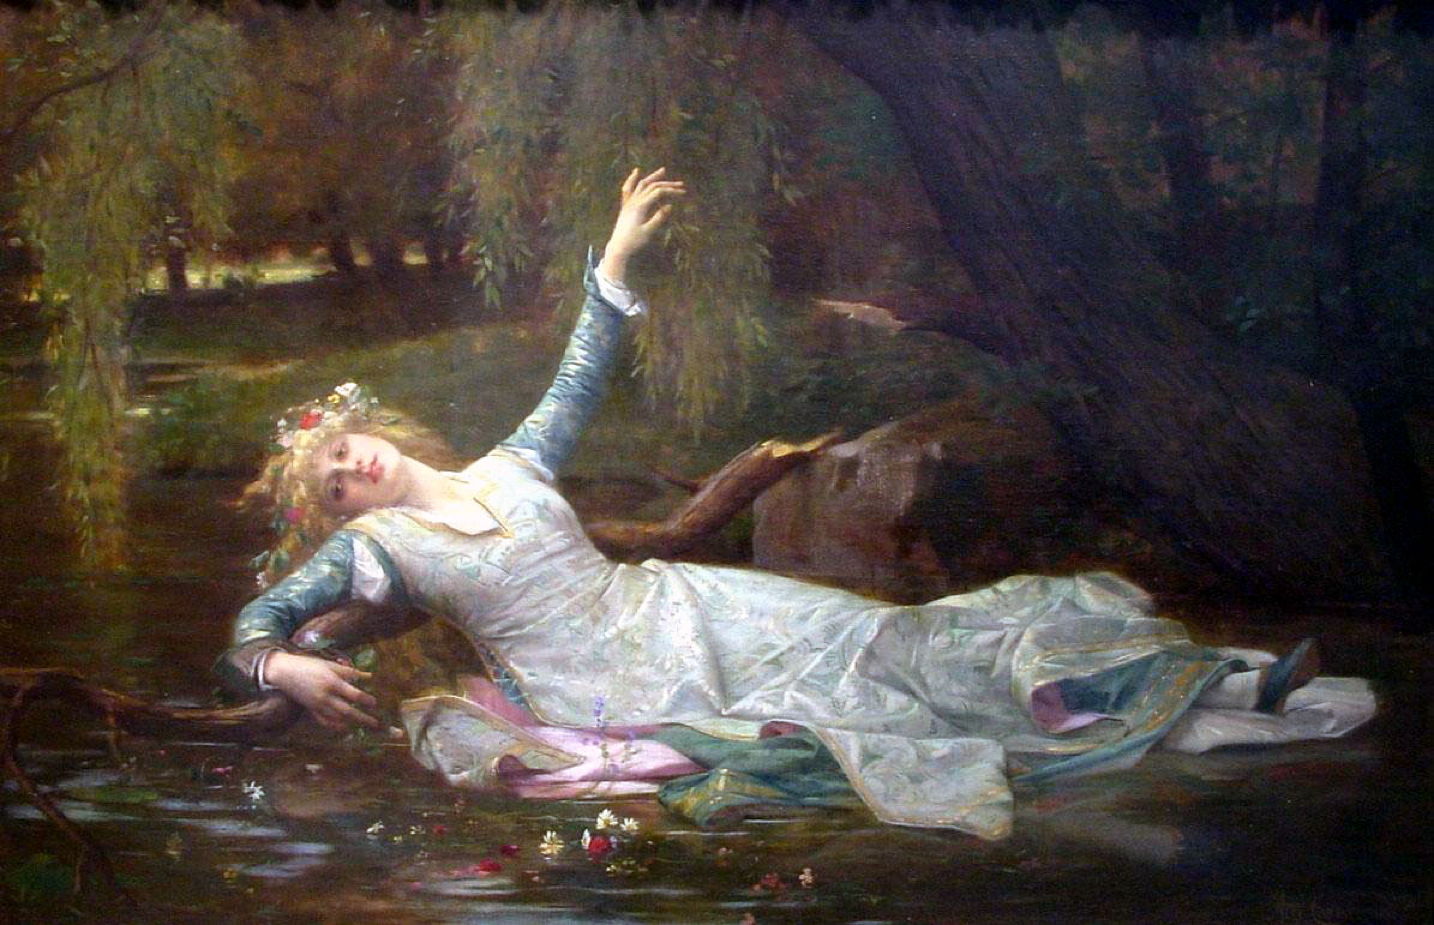 Alexandre Cabanel's Ophelia, featuring a woman stretching her arms to the sky